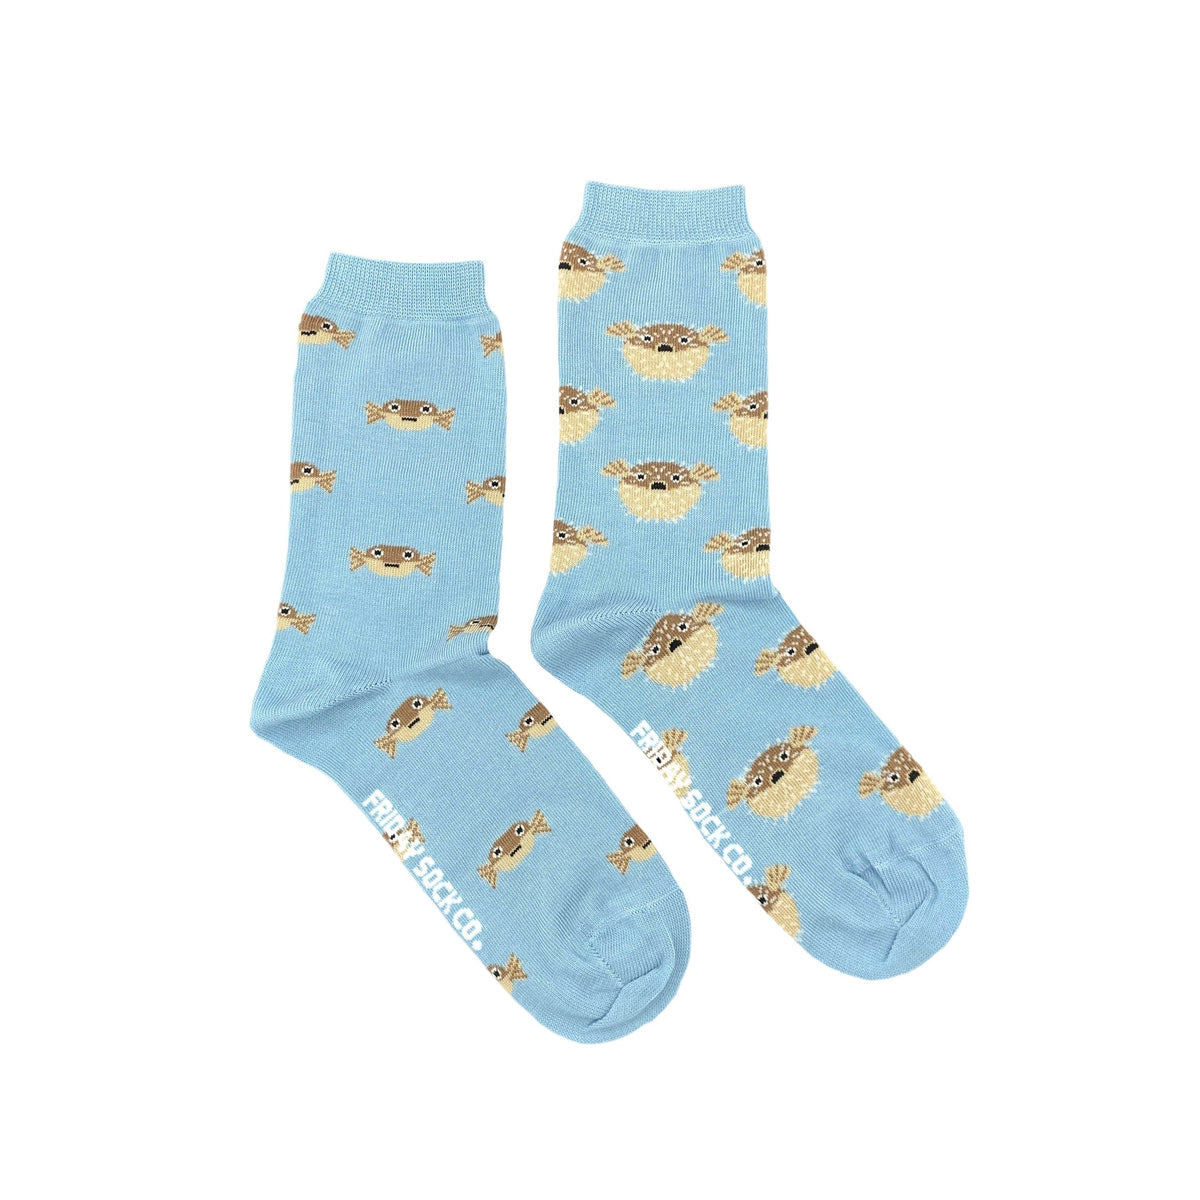 Women's Puffer Fish Socks | Mismatched by Design | Friday Sock Co.